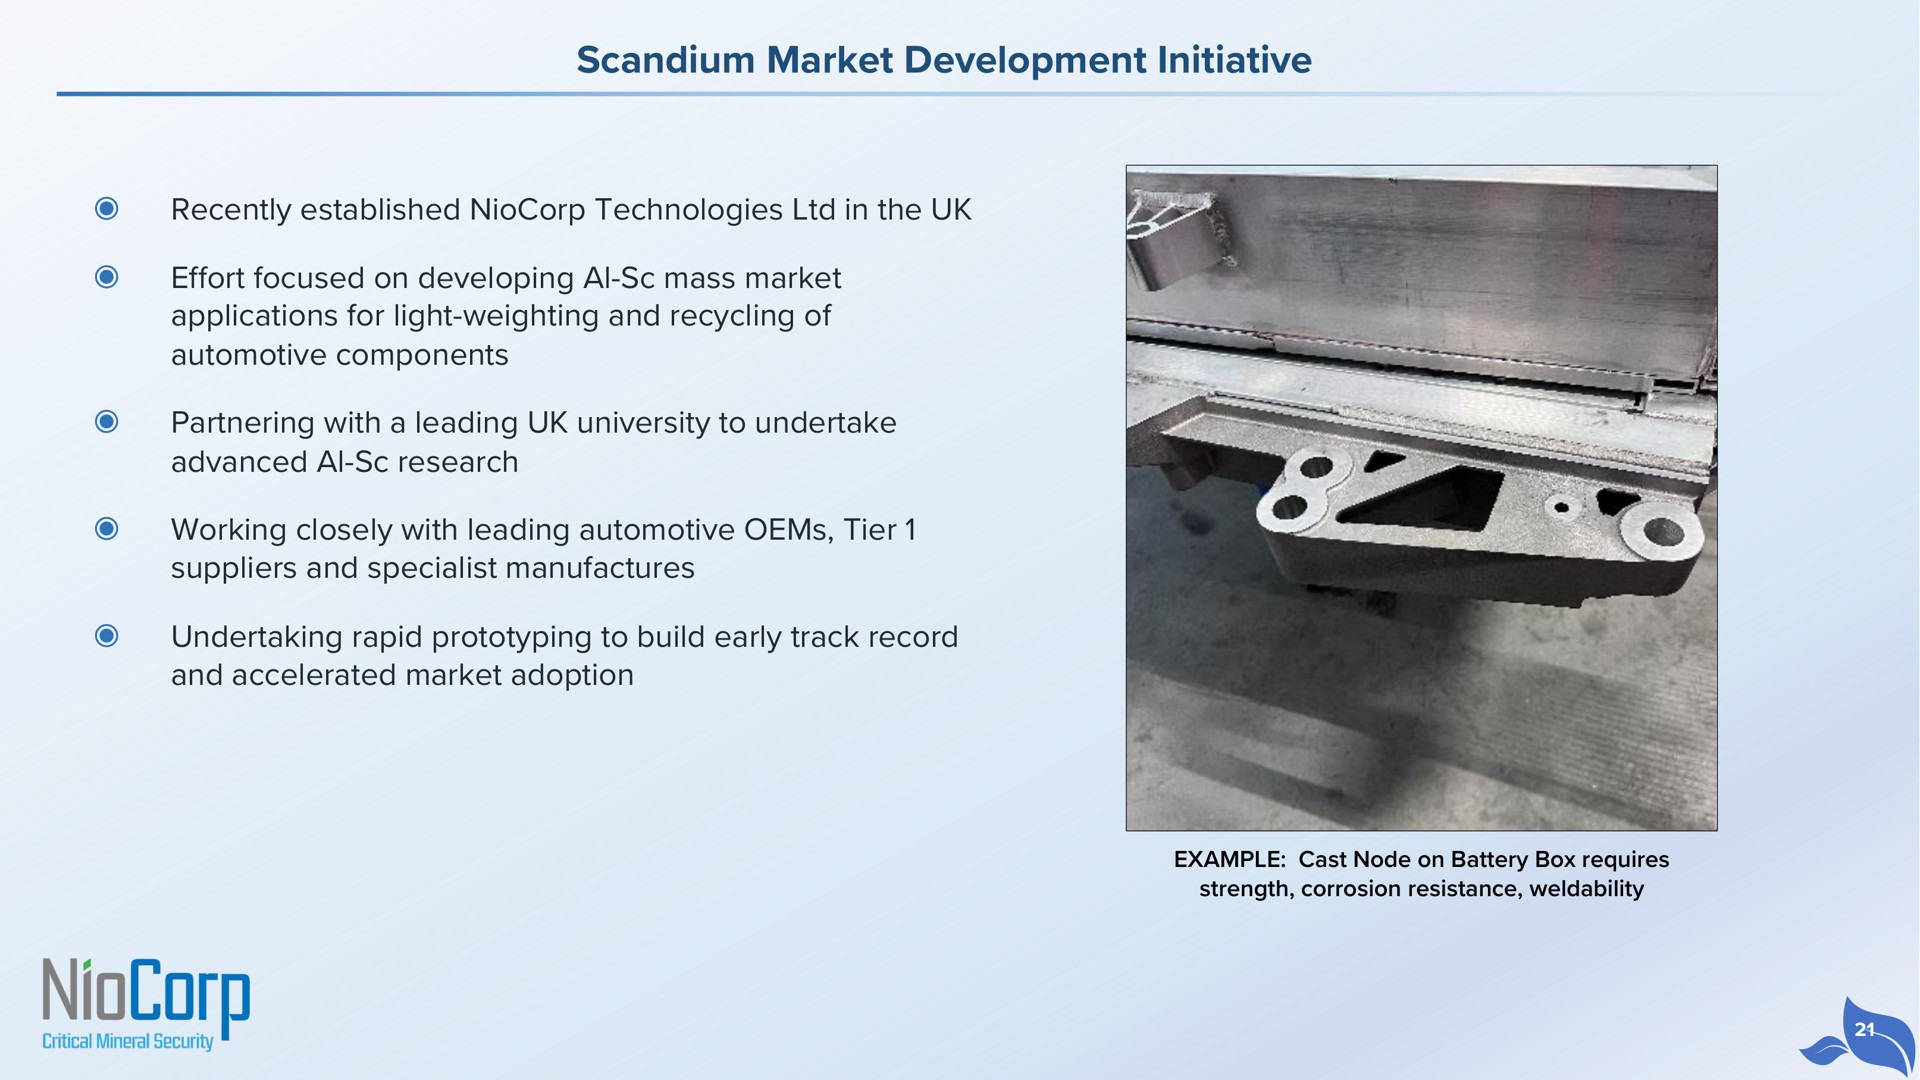 scandium market development initiative recently established technologies in the effort focused on developing mass market applications for light weighting and recycling of automotive components partnering with a leading university to undertake advanced research working closely with leading automotive tier suppliers and specialist manufactures undertaking rapid to build early track record and accelerated market adoption | NioCorp